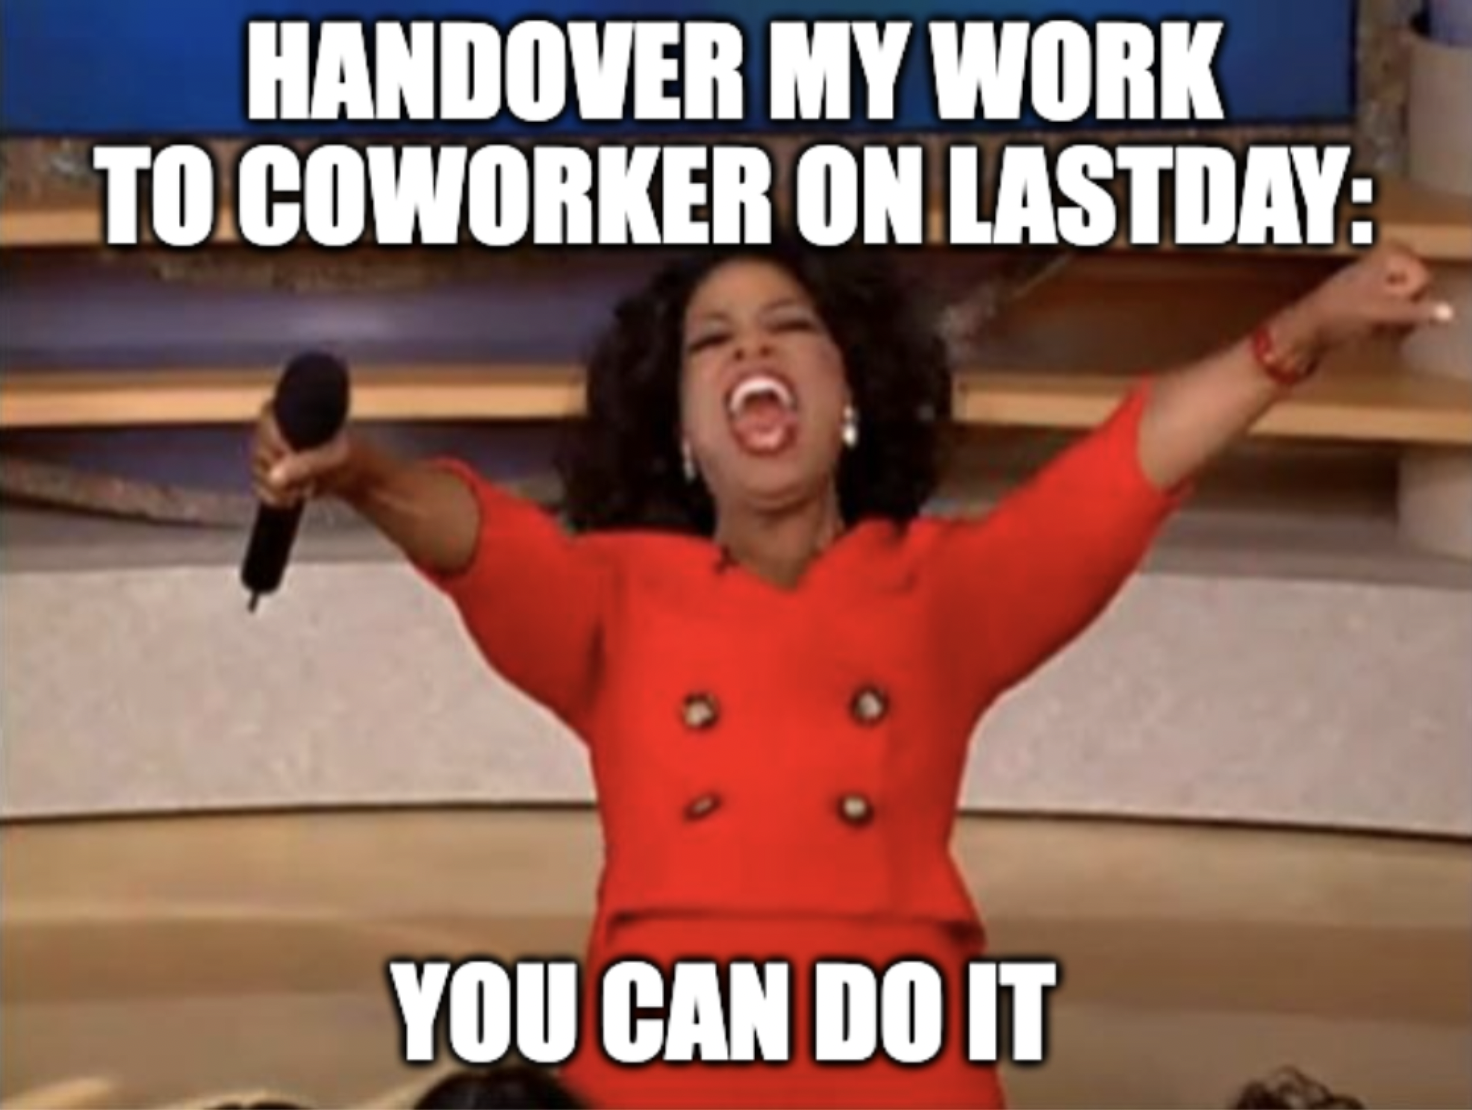 password manager meme - Handover My Work To Coworker On Lastday You Can Do It